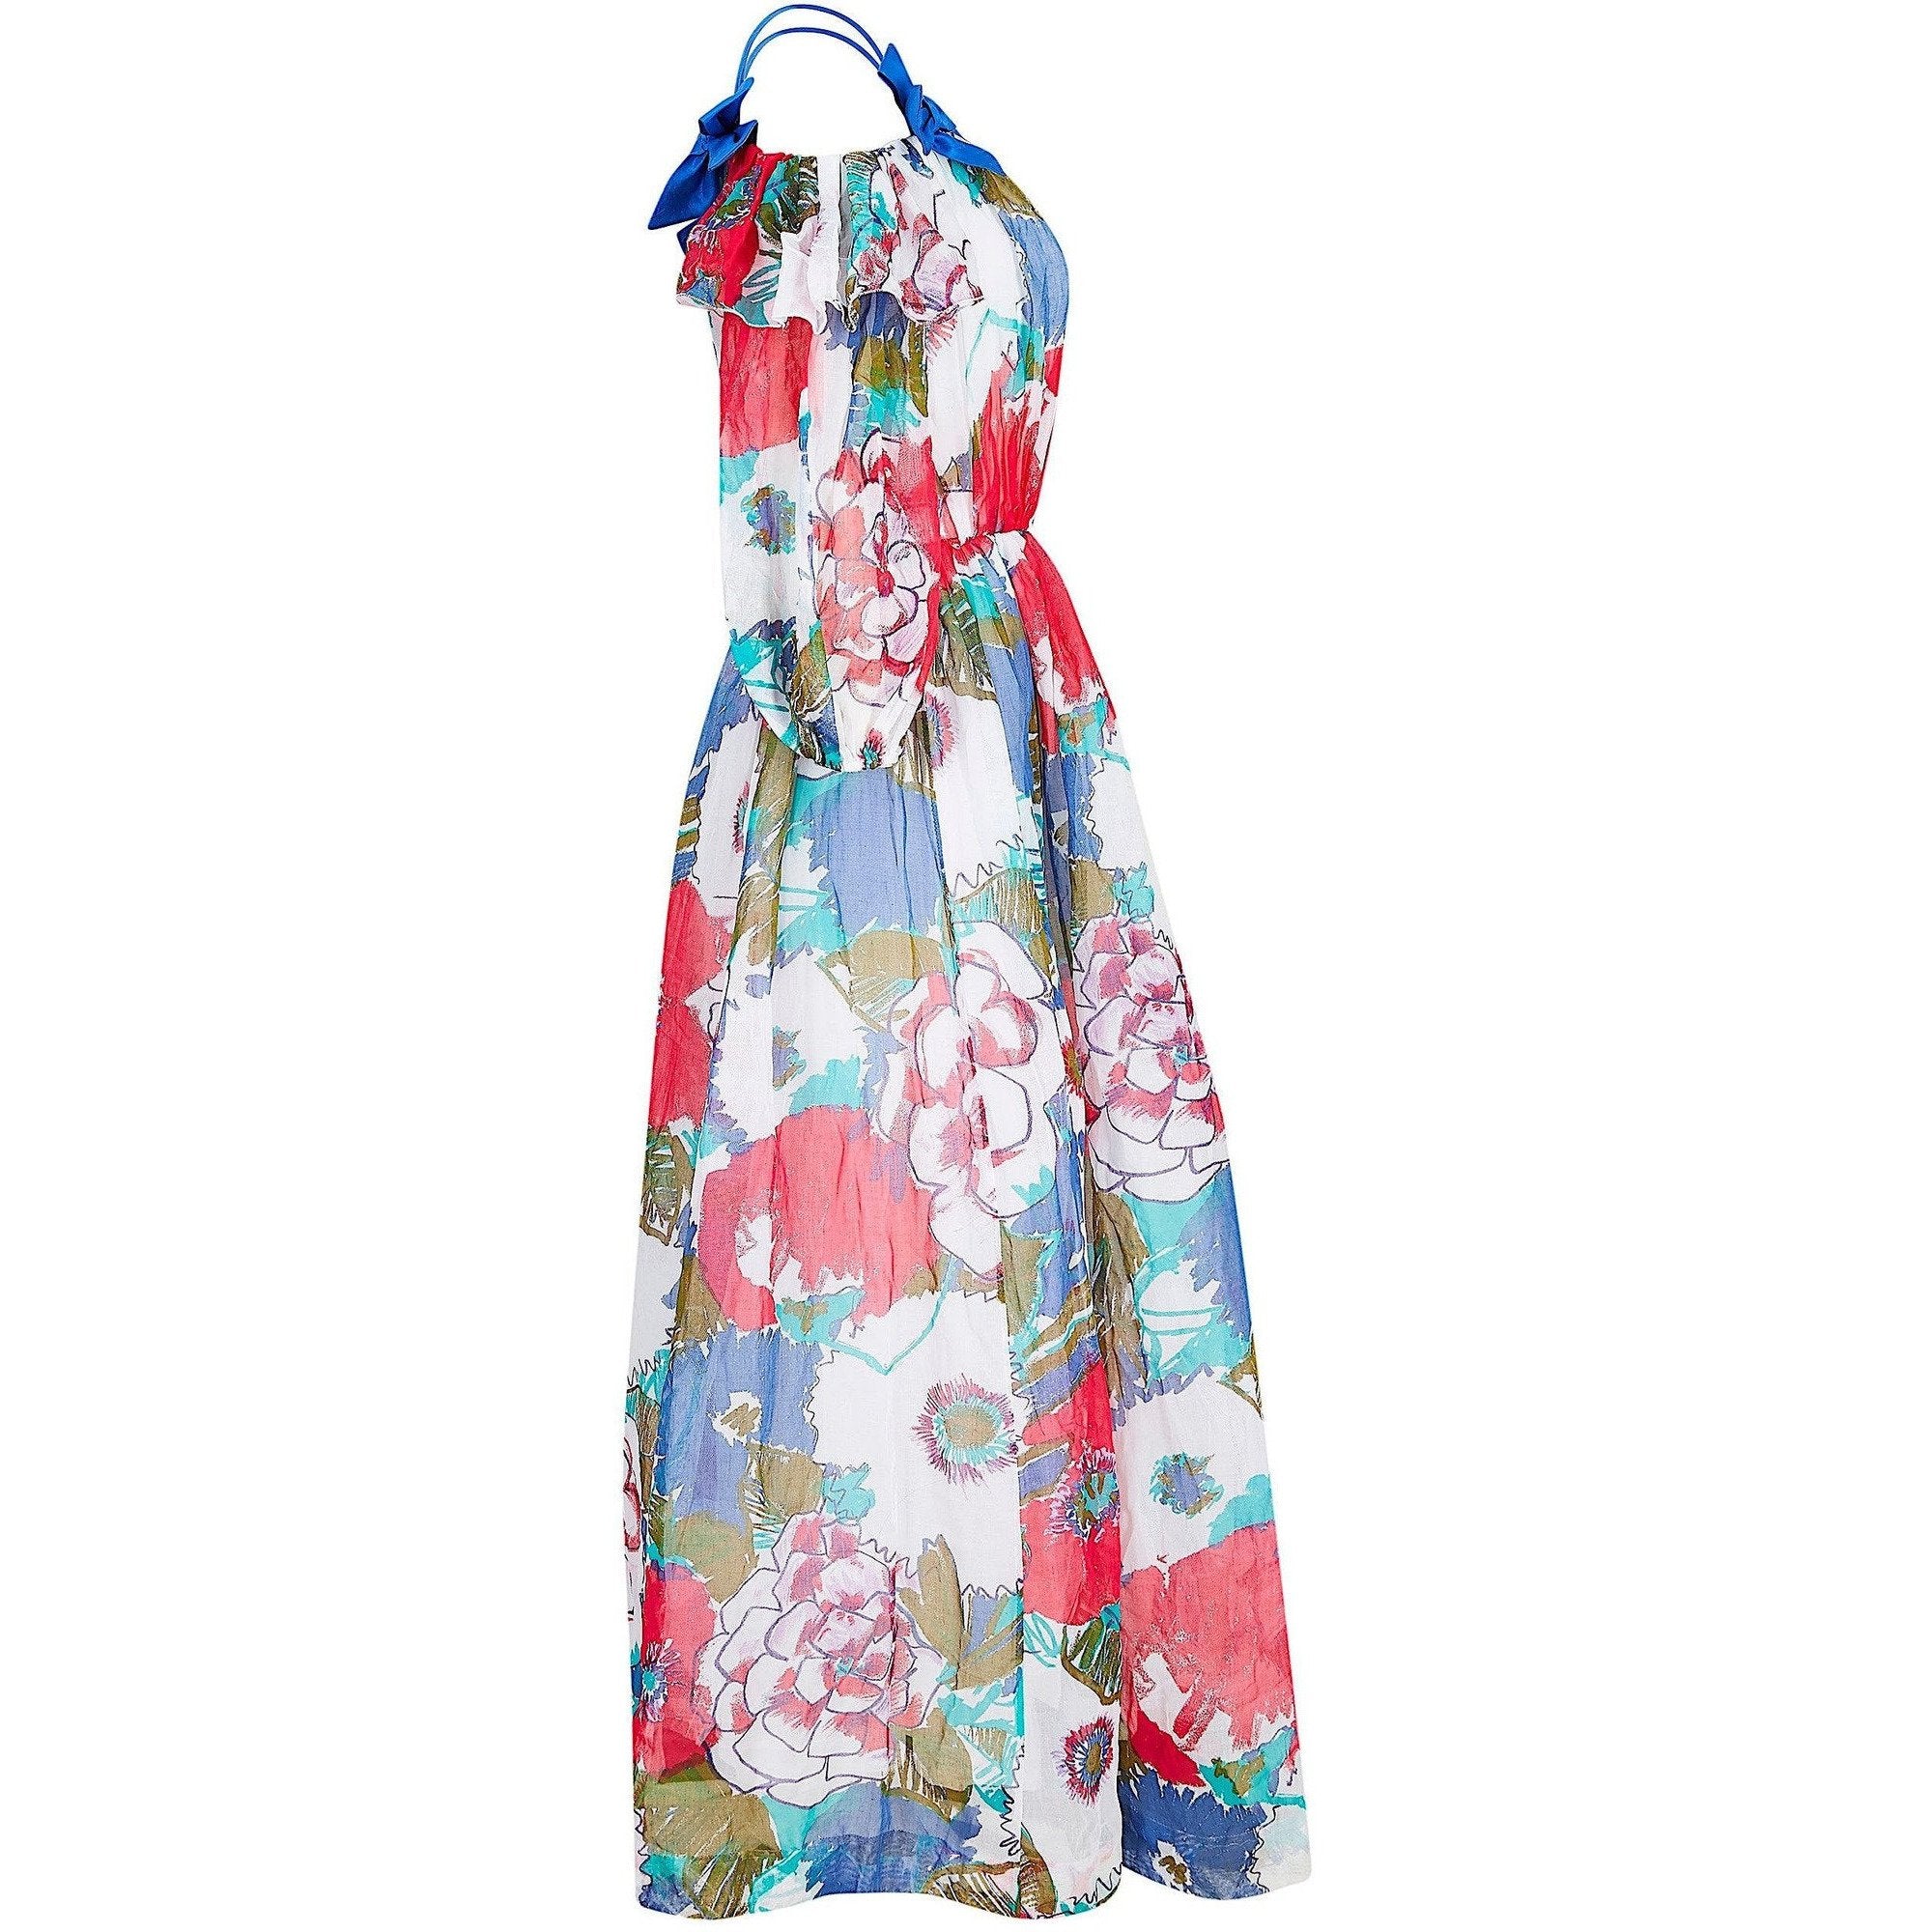 1980s Donald Campbell Printed Floral Cotton Organdy Maxi Dress